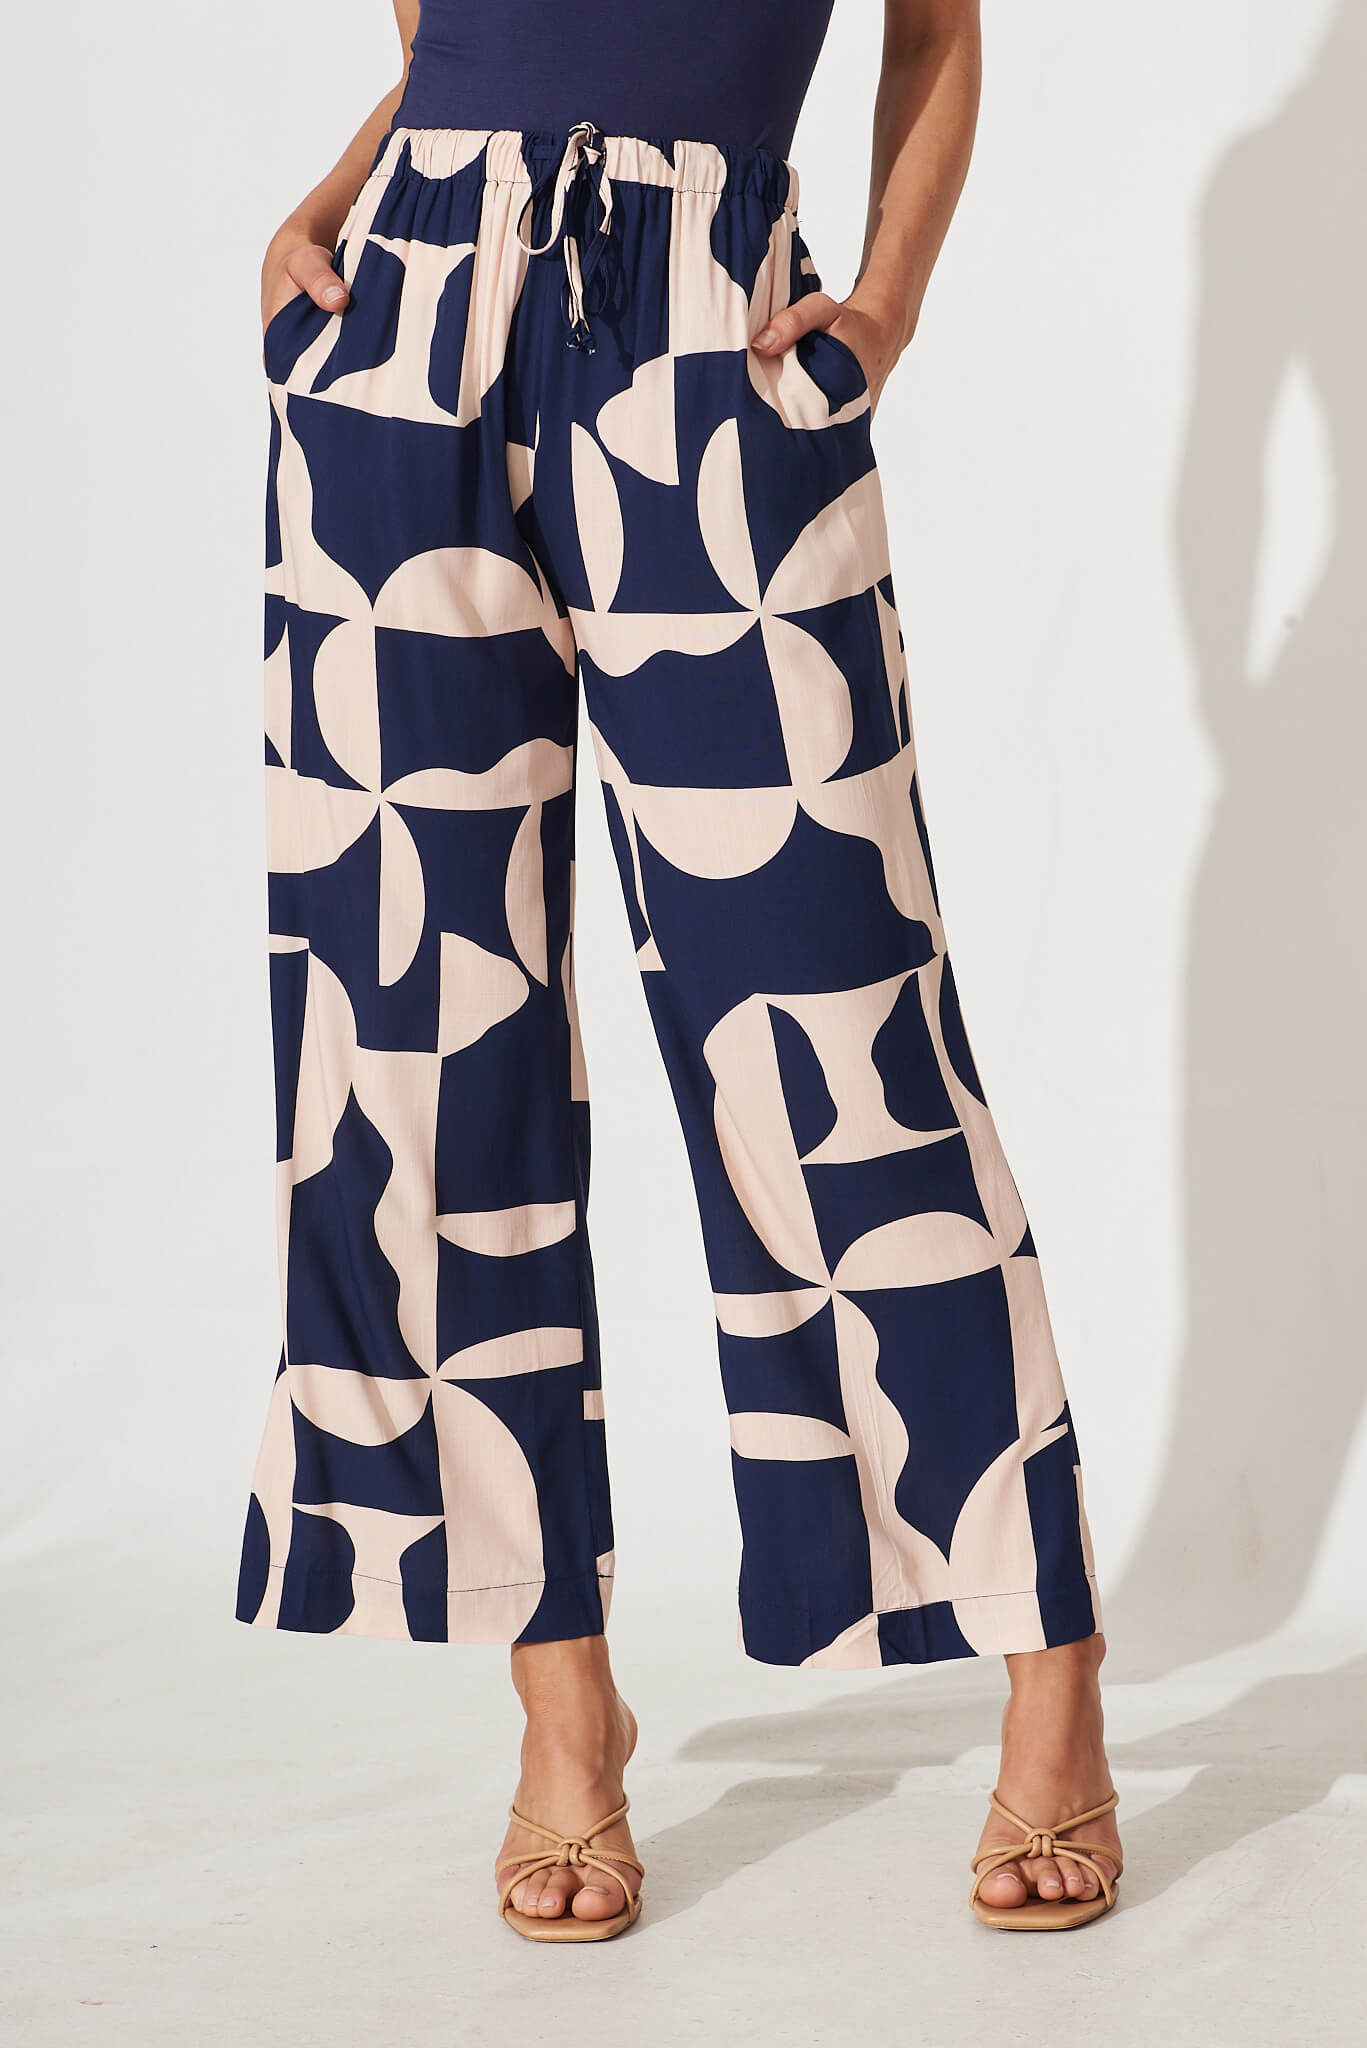 Oceanside Pants In Navy And Cream Geometric Print – St Frock